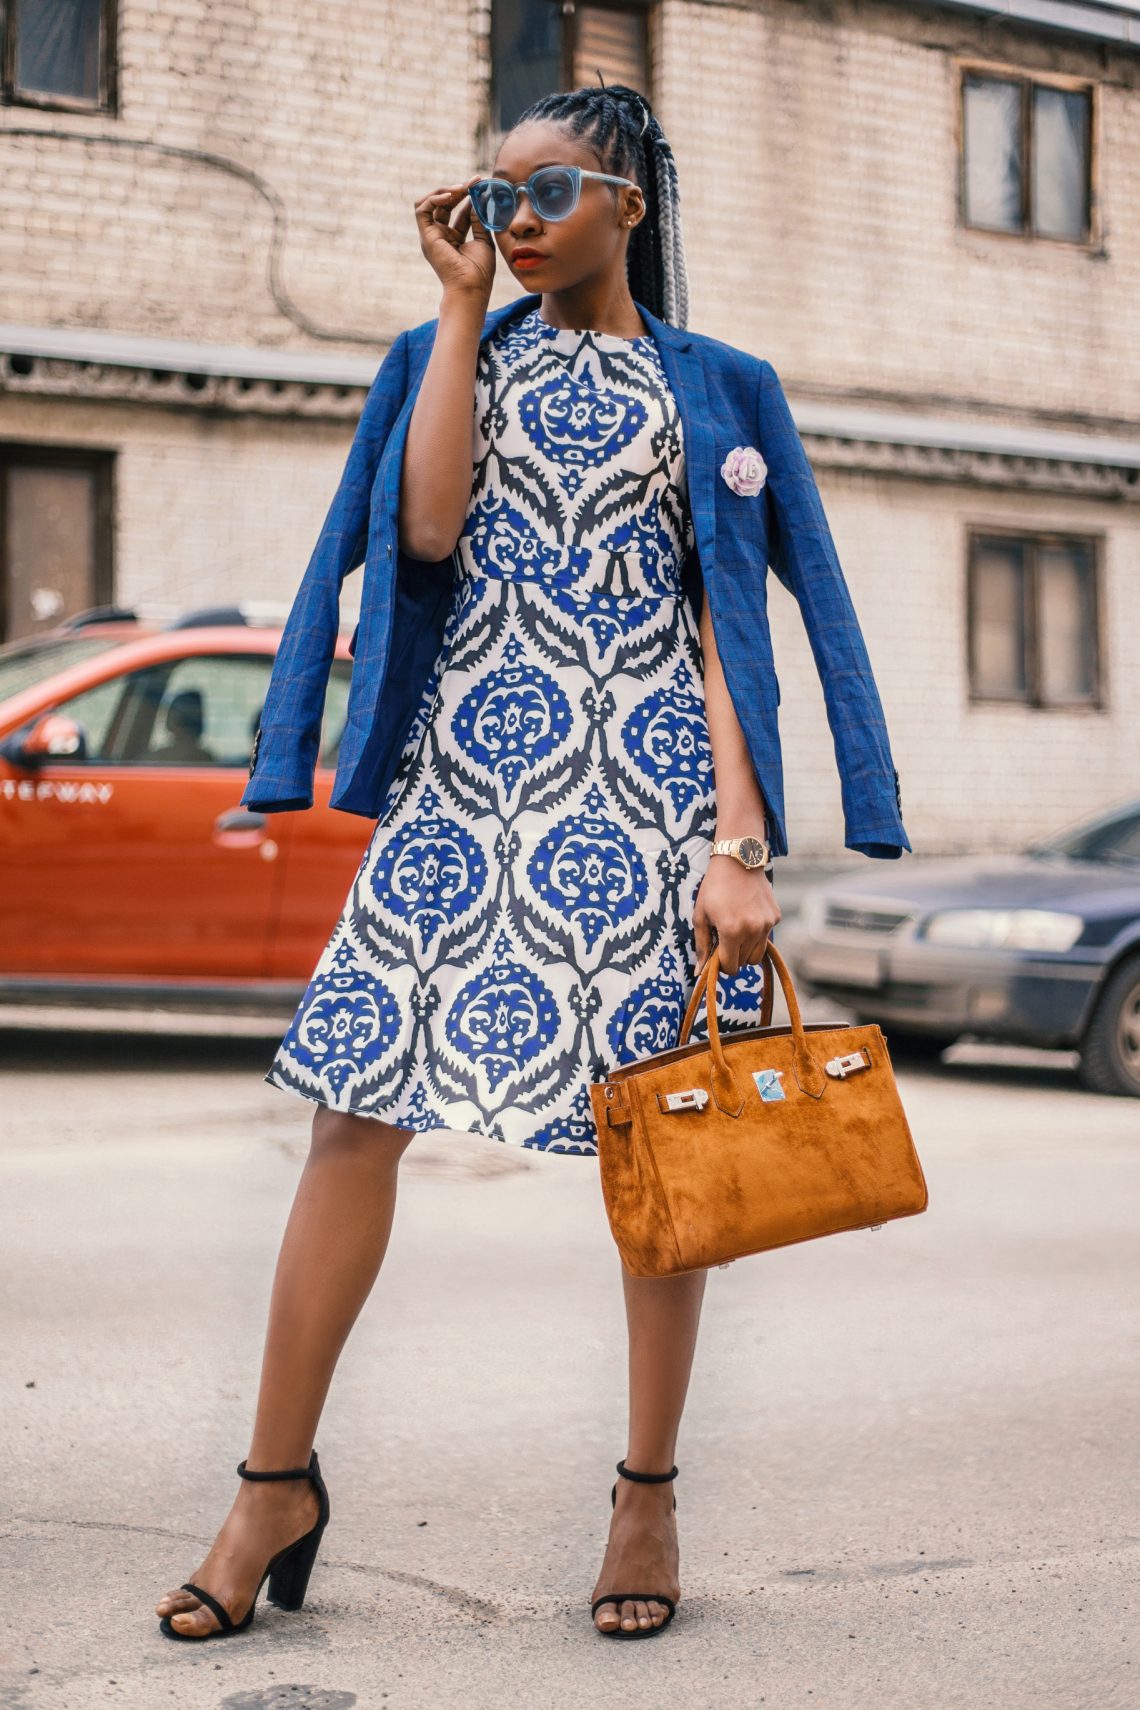 Woman wearing white and blue floral dress carrying brown handbag